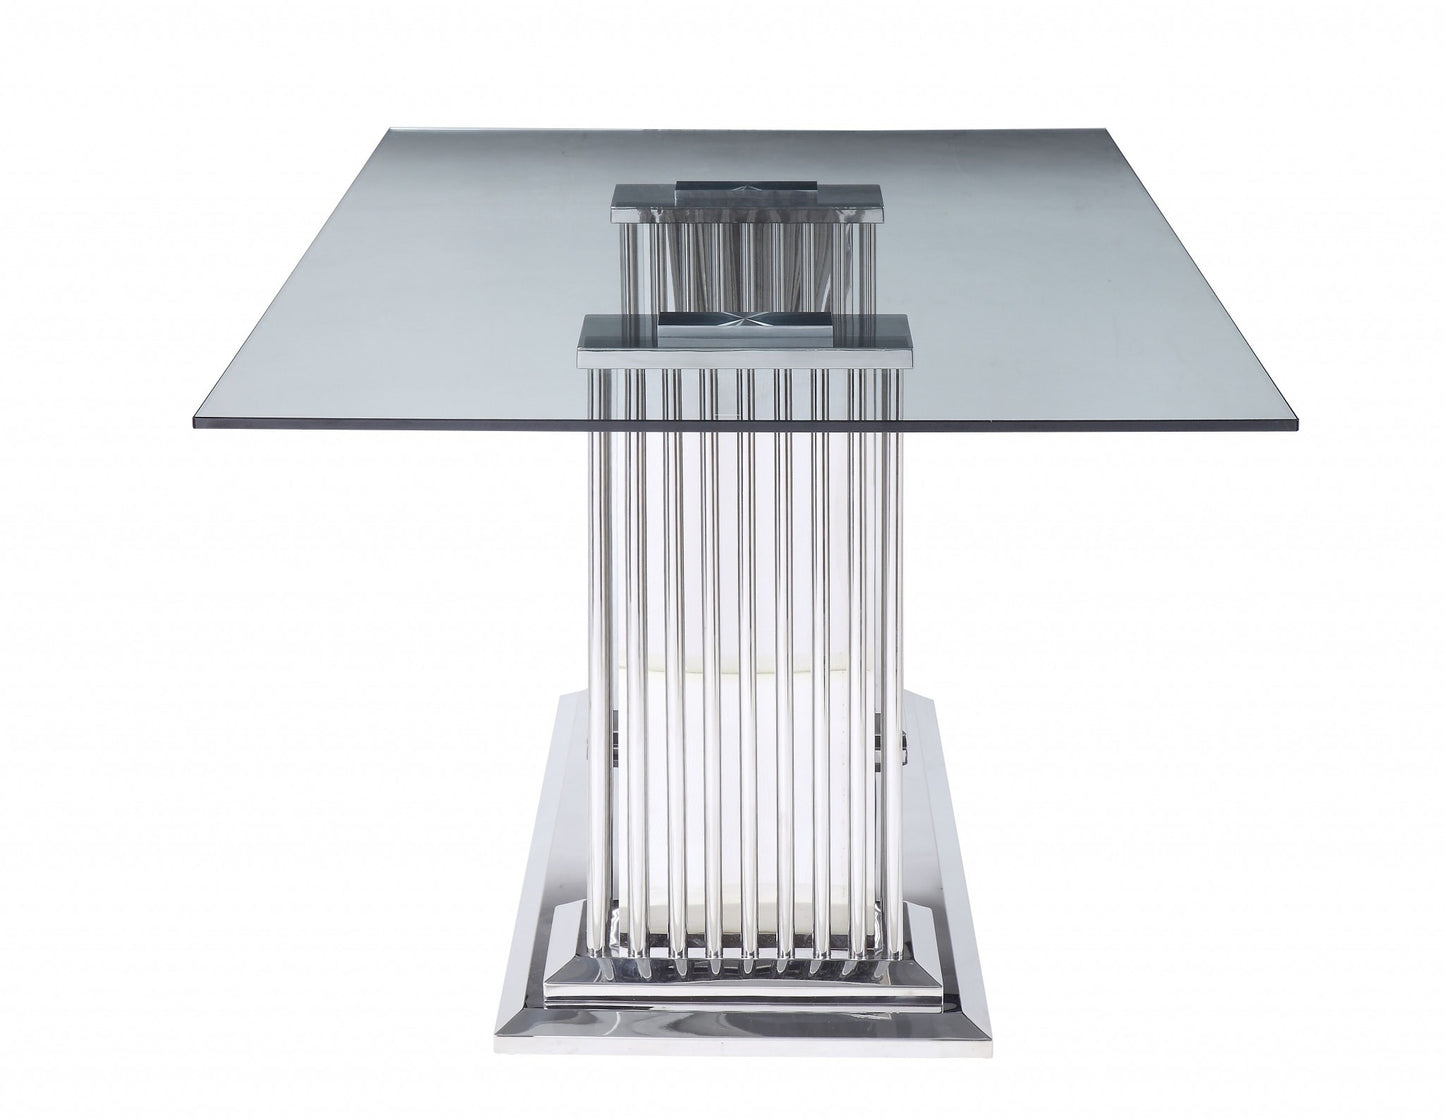 39" Clear And Silver Glass And Stainless Steel Trestle Base Dining Table